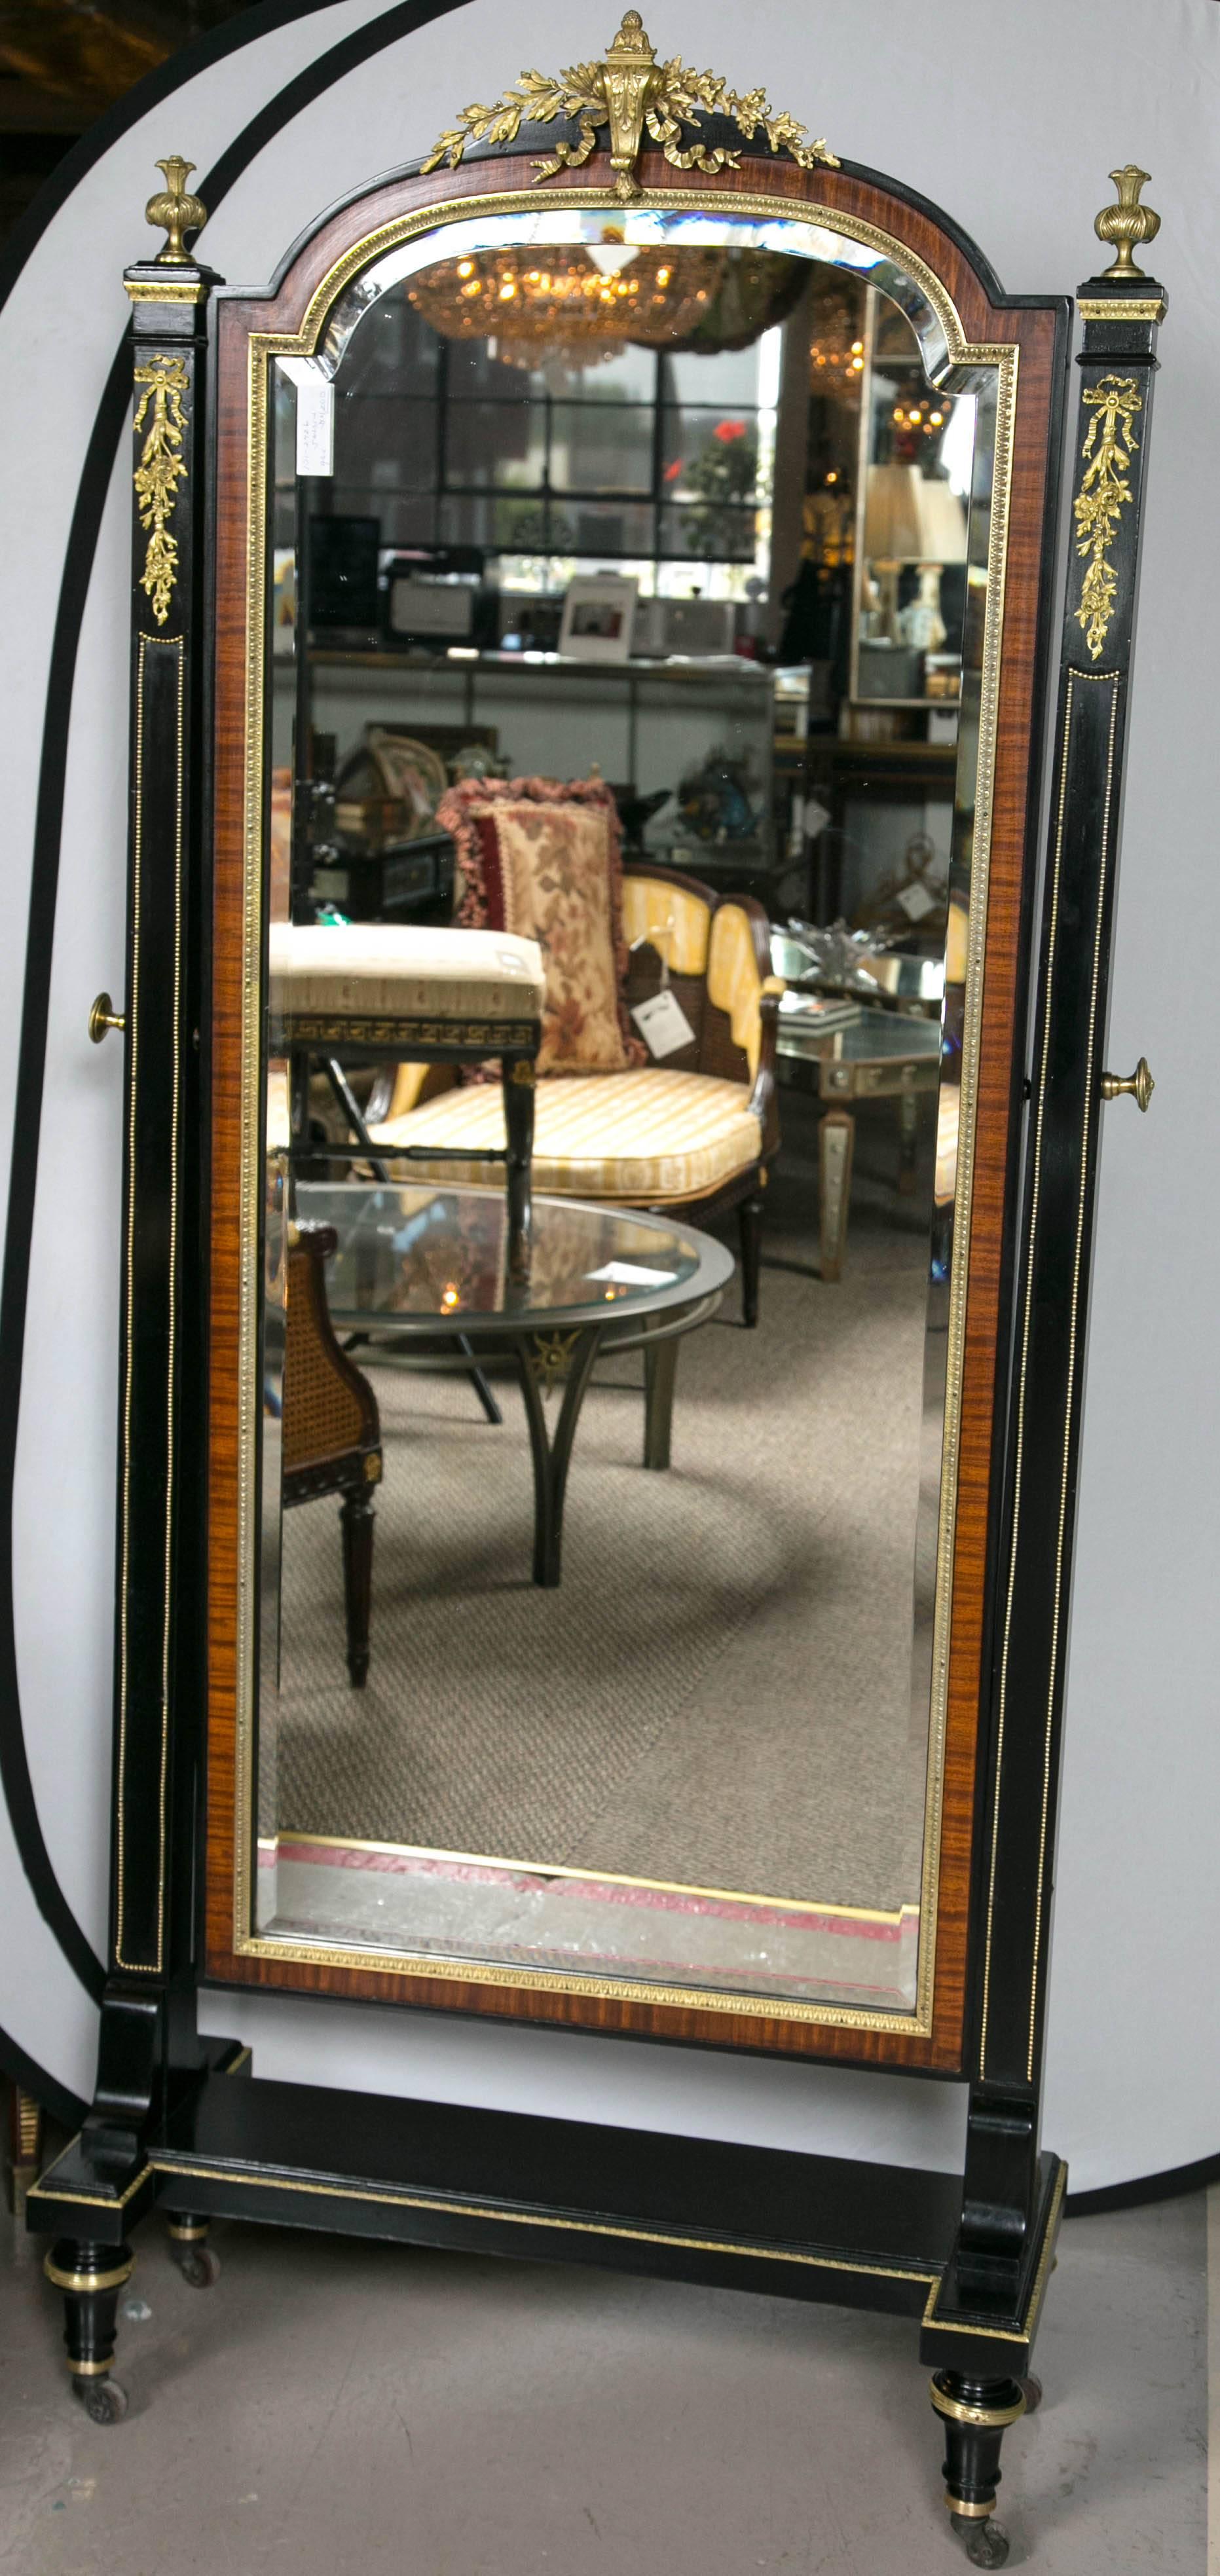 Bronze-mounted cheval tilting mirror by Maison Jansen. This mirror is simply a work of art in and of itself. The finest bronze castings seeming like jewelry quality run up and down this wonderfully ebony mirror frame with rosewood banding. The whole